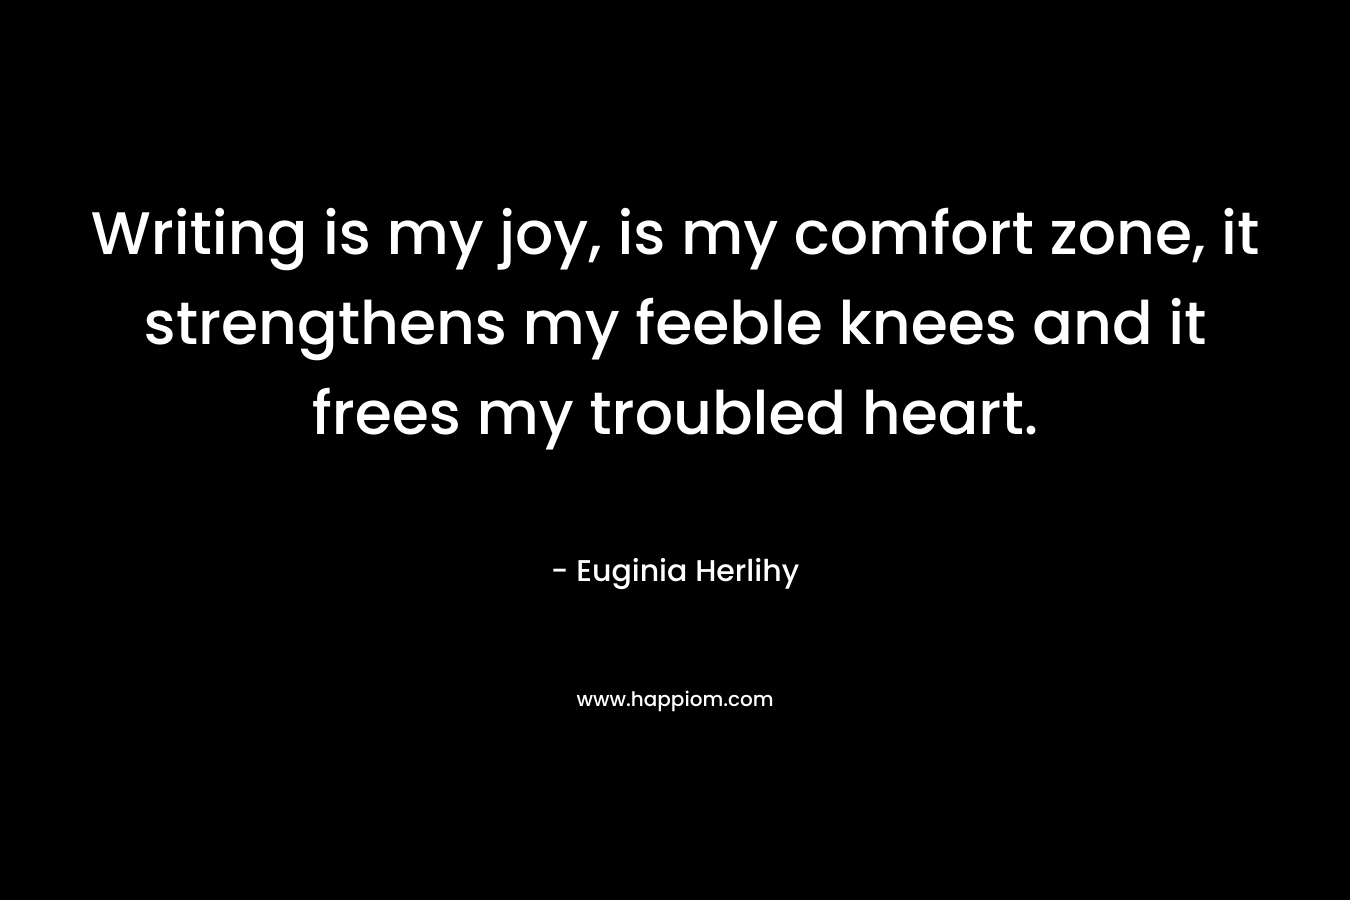 Writing is my joy, is my comfort zone, it strengthens my feeble knees and it frees my troubled heart. – Euginia Herlihy